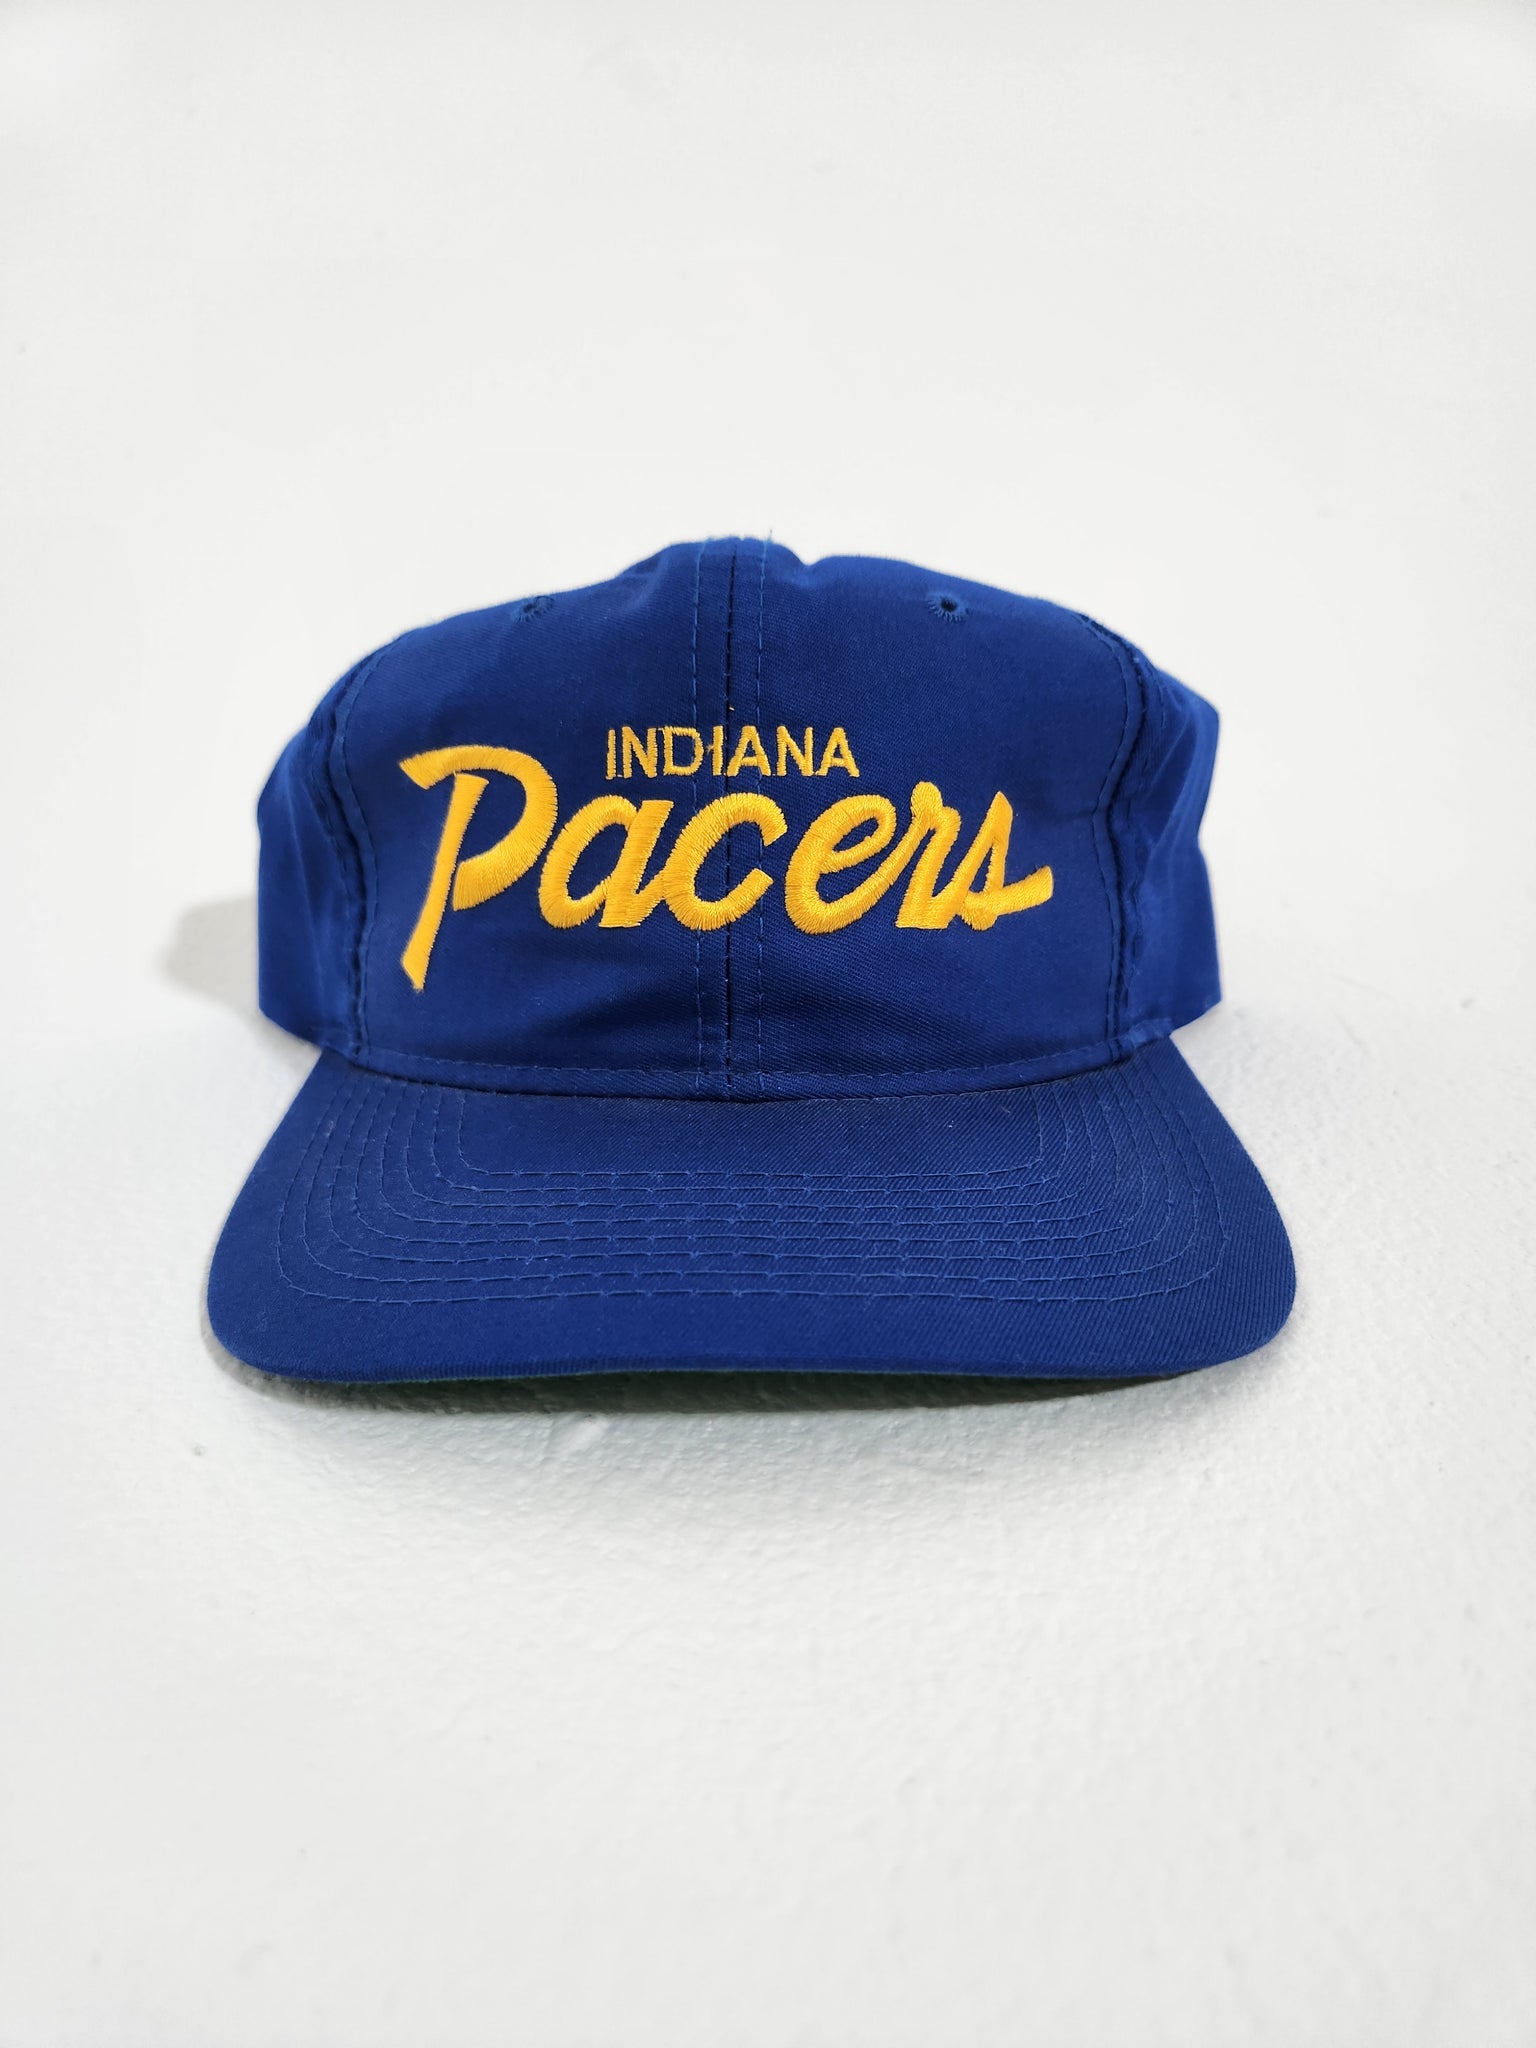 Indiana Pacers Vintage 90s NBA Script Snapback, Sports Specialties New  With Tags